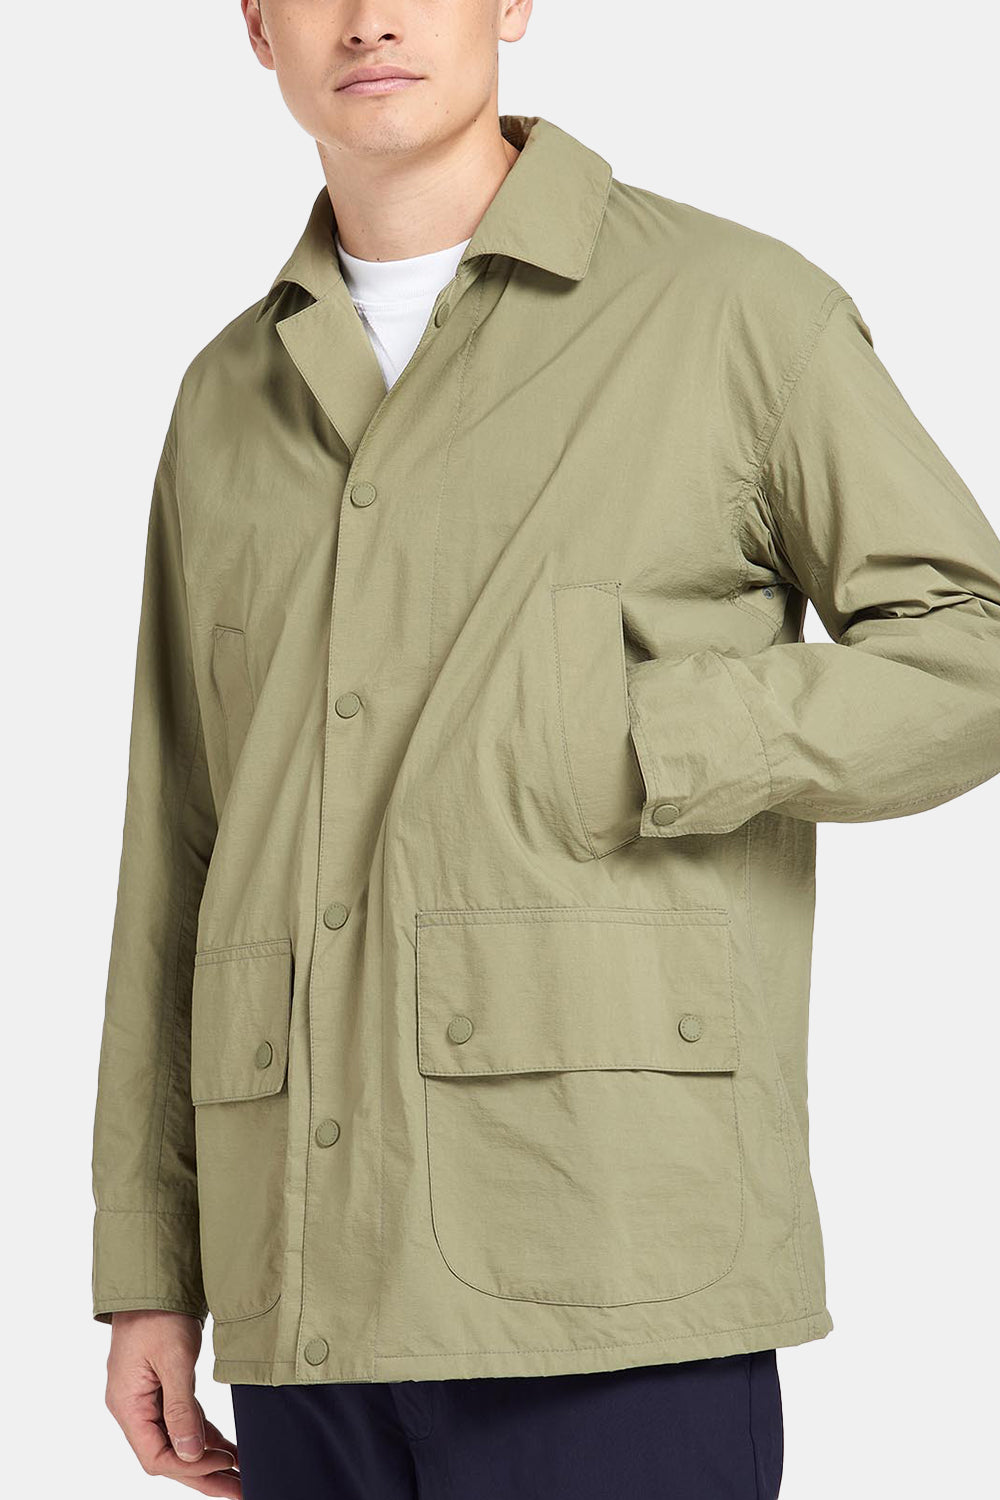 Barbour White Label Kyoto Casual (Bleached Olive)